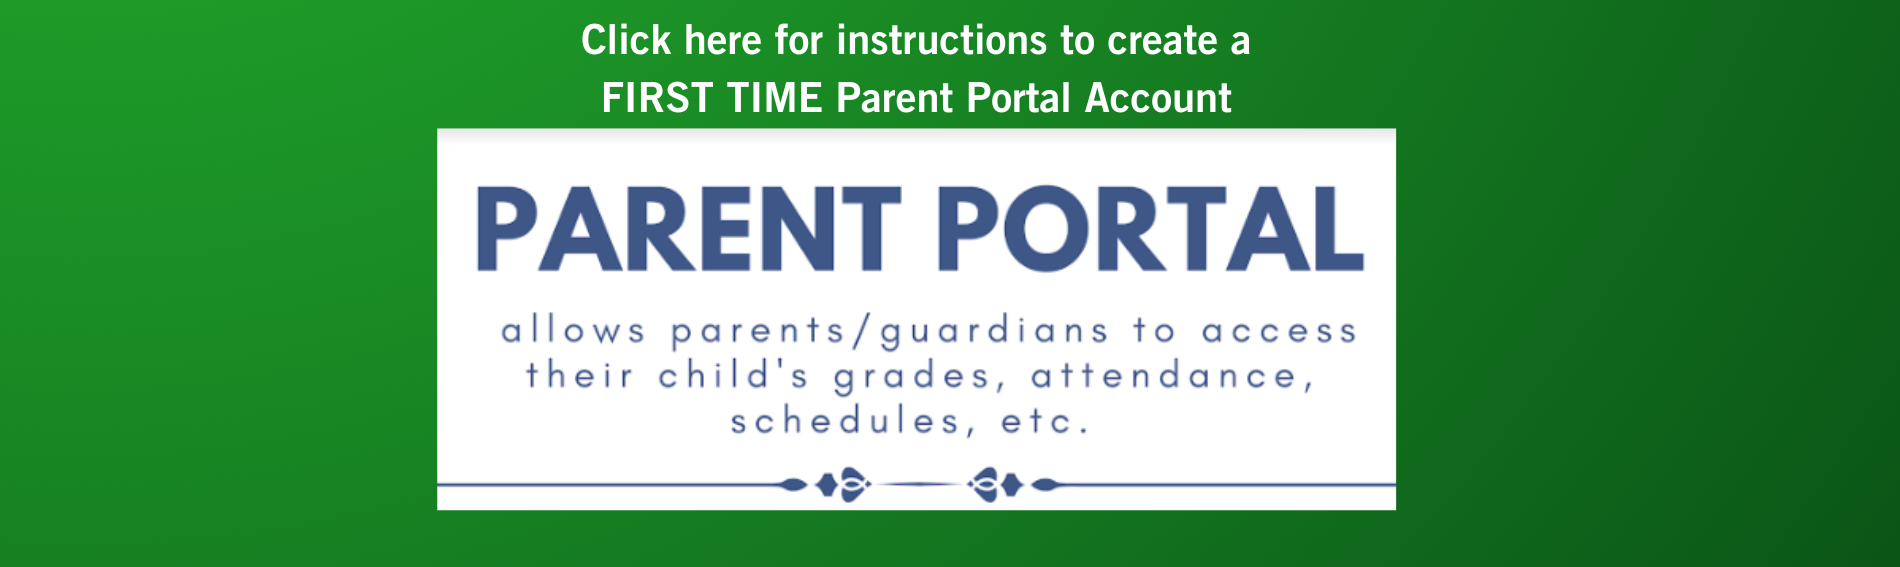 Click here to access instructions for how to open a FIRST TIME parent portal account. PARENT PORTAL allows parents/guardians to access their child's grades, attendance, schedules, etc.